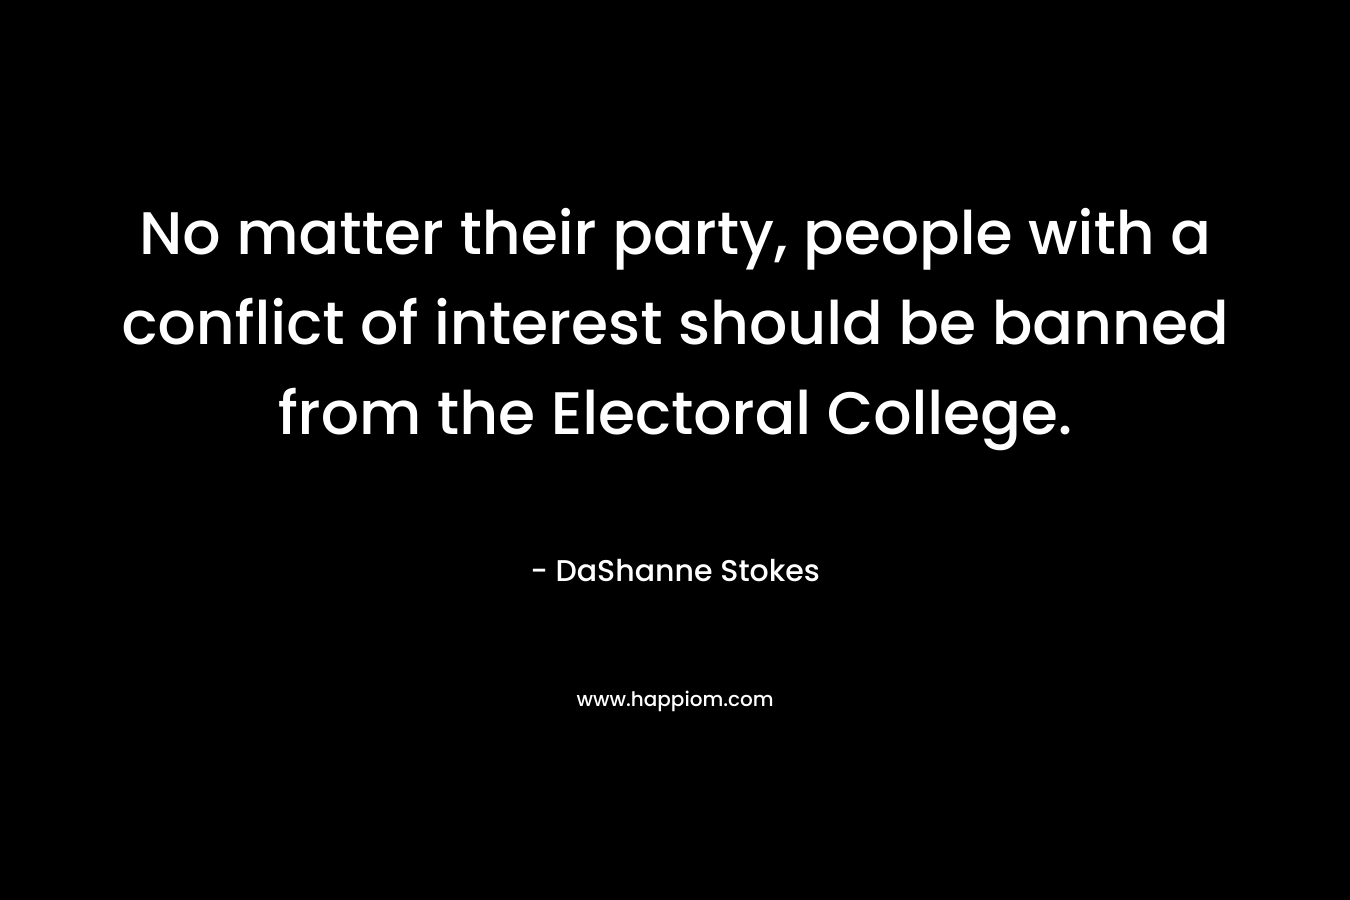 No matter their party, people with a conflict of interest should be banned from the Electoral College.